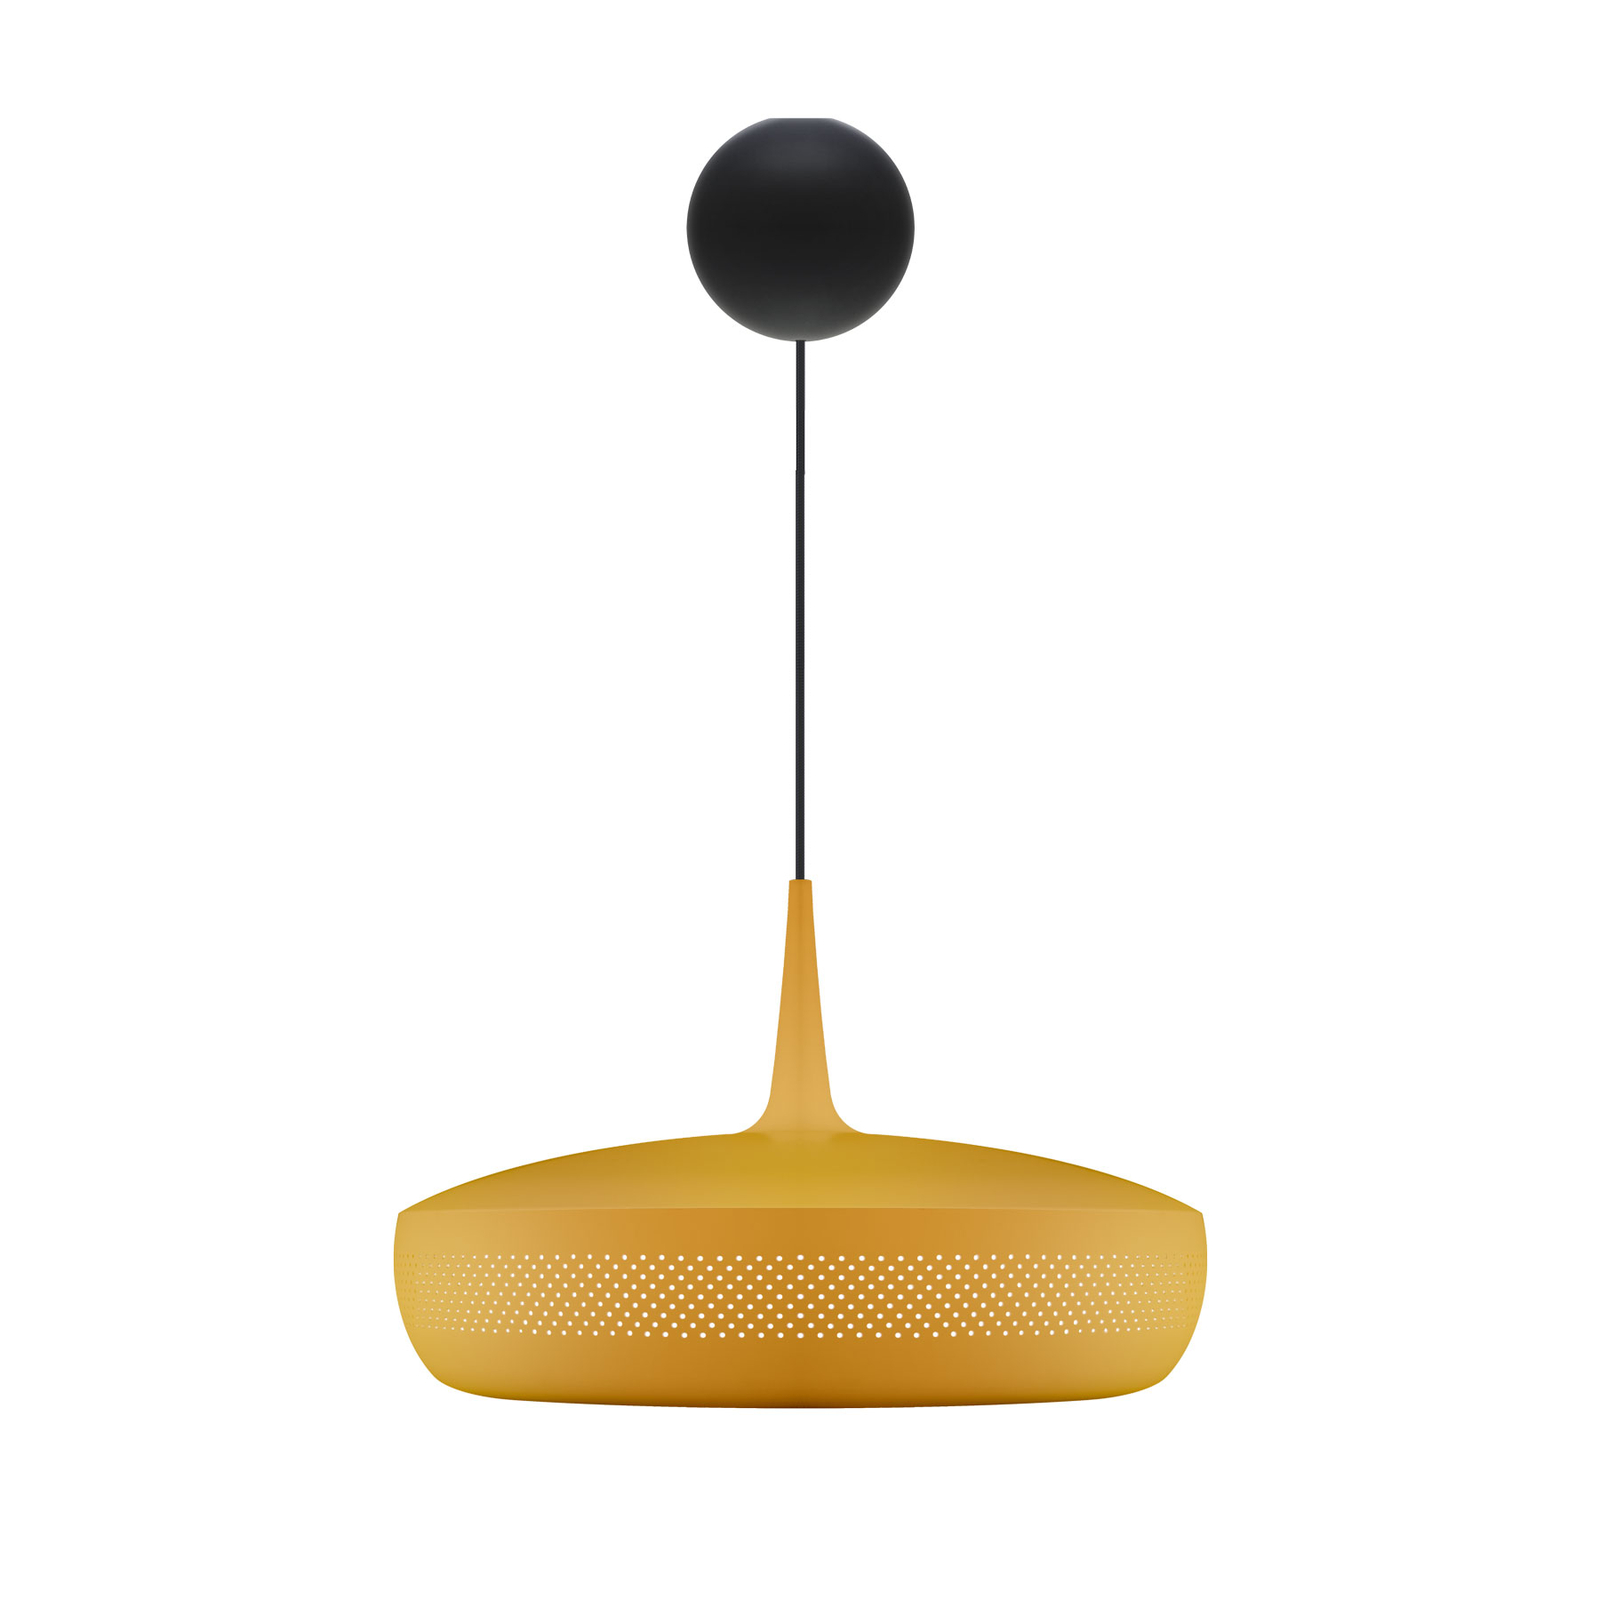 UMAGE Clava Dine hanging light in yellow